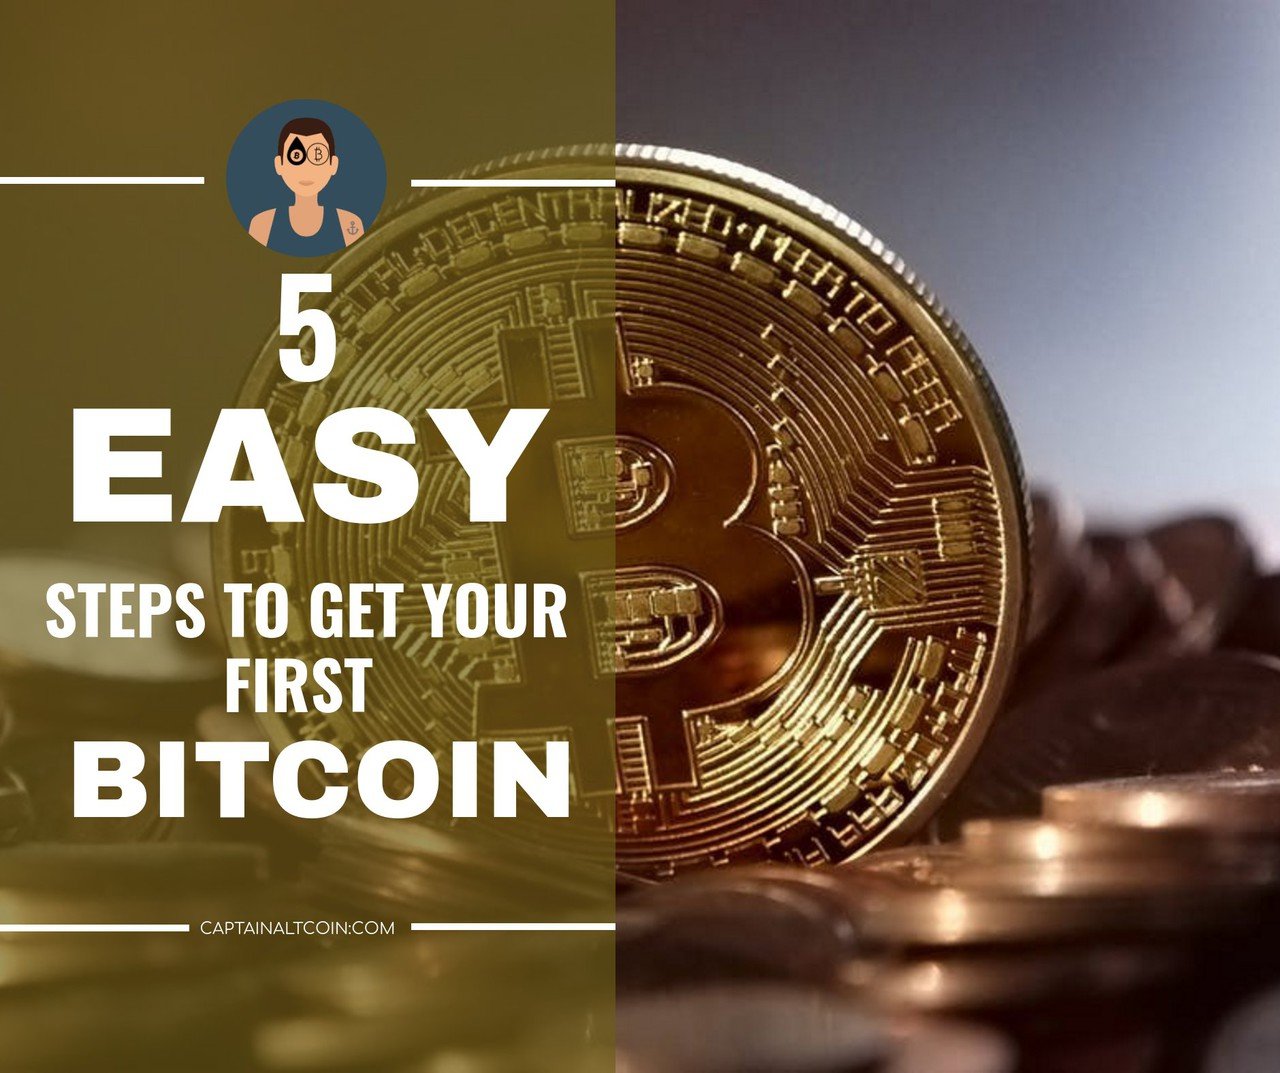 7 get bitcoin which crypto currency is cheaper btc eth ltc